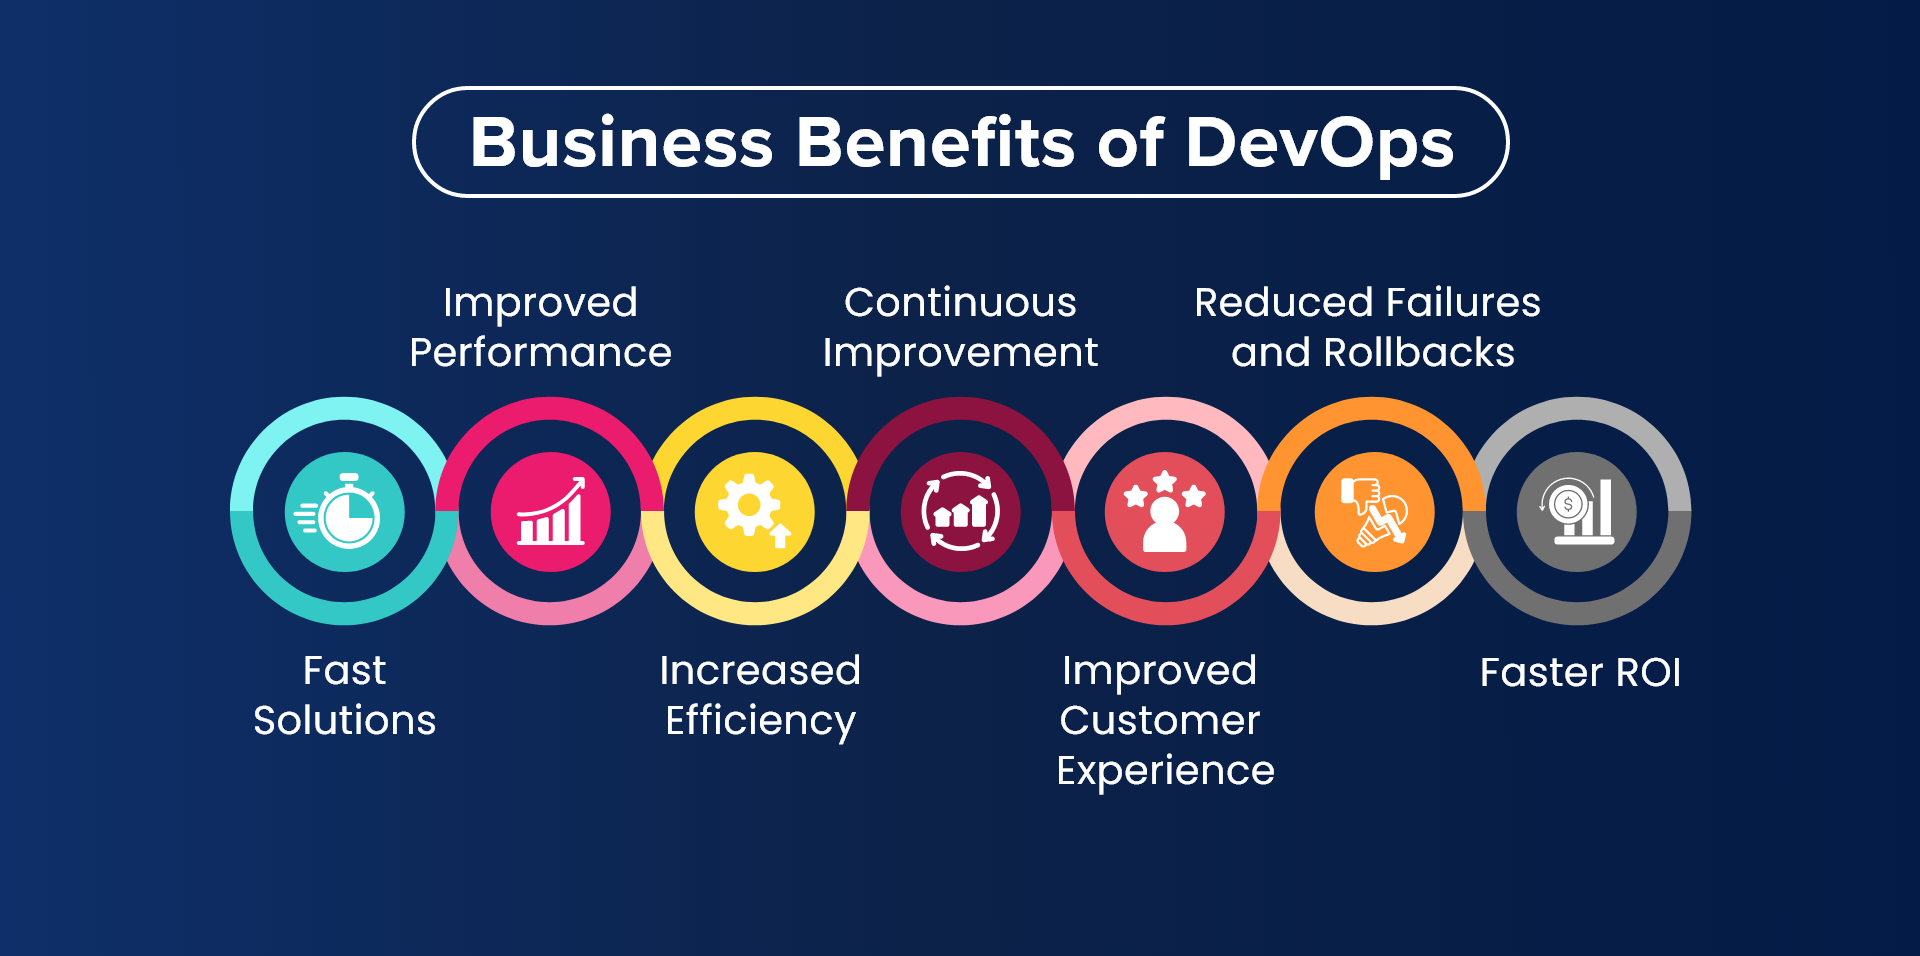 Accelerating Retail Business Performance with DevOps